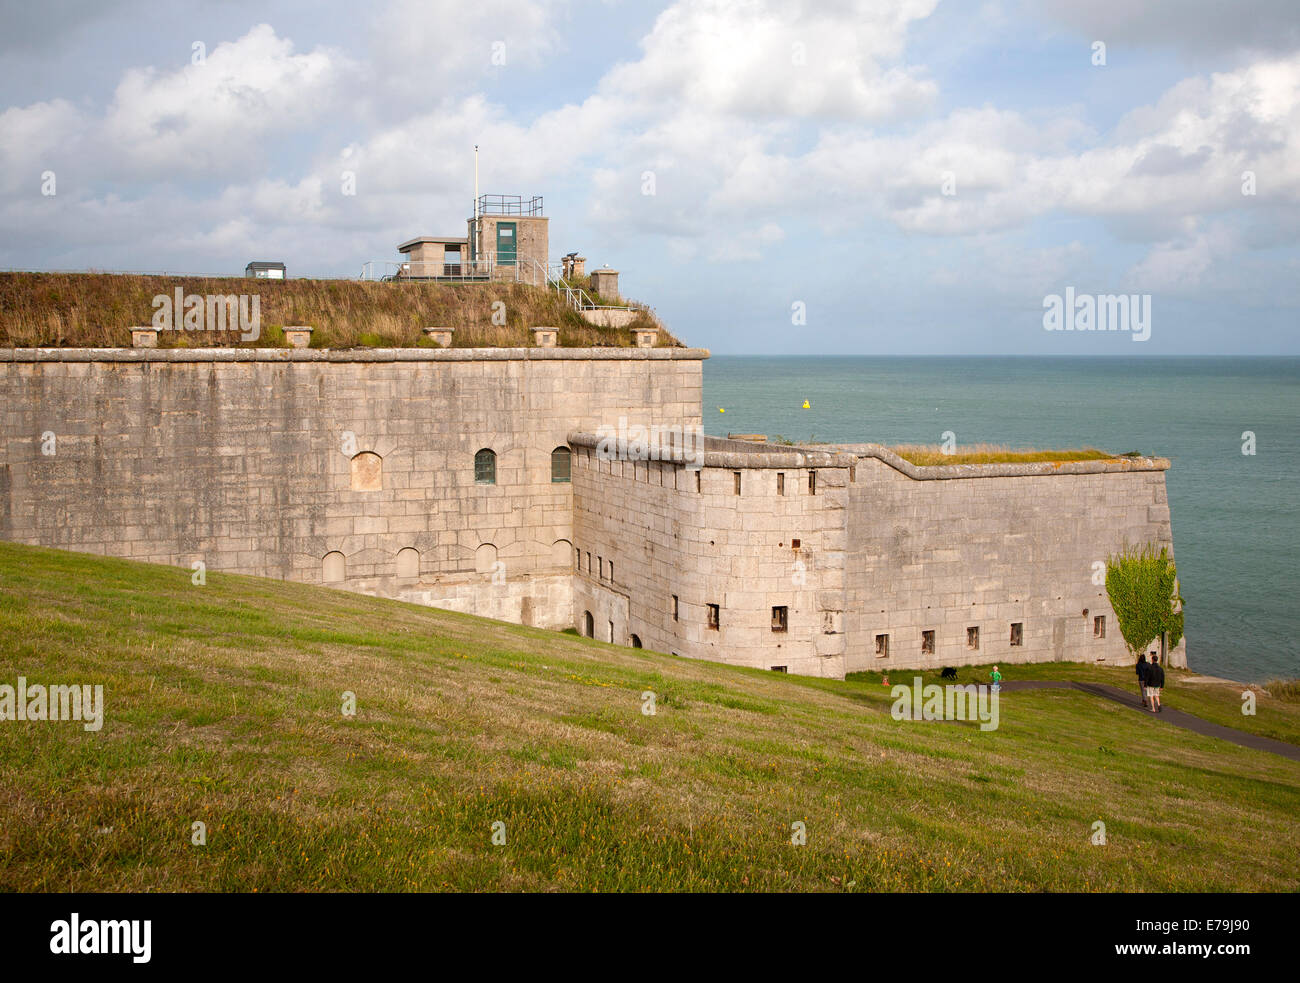 Perimeter defensive walls to Nothe Fort built in 1872 Weymouth, Dorset, England Stock Photo